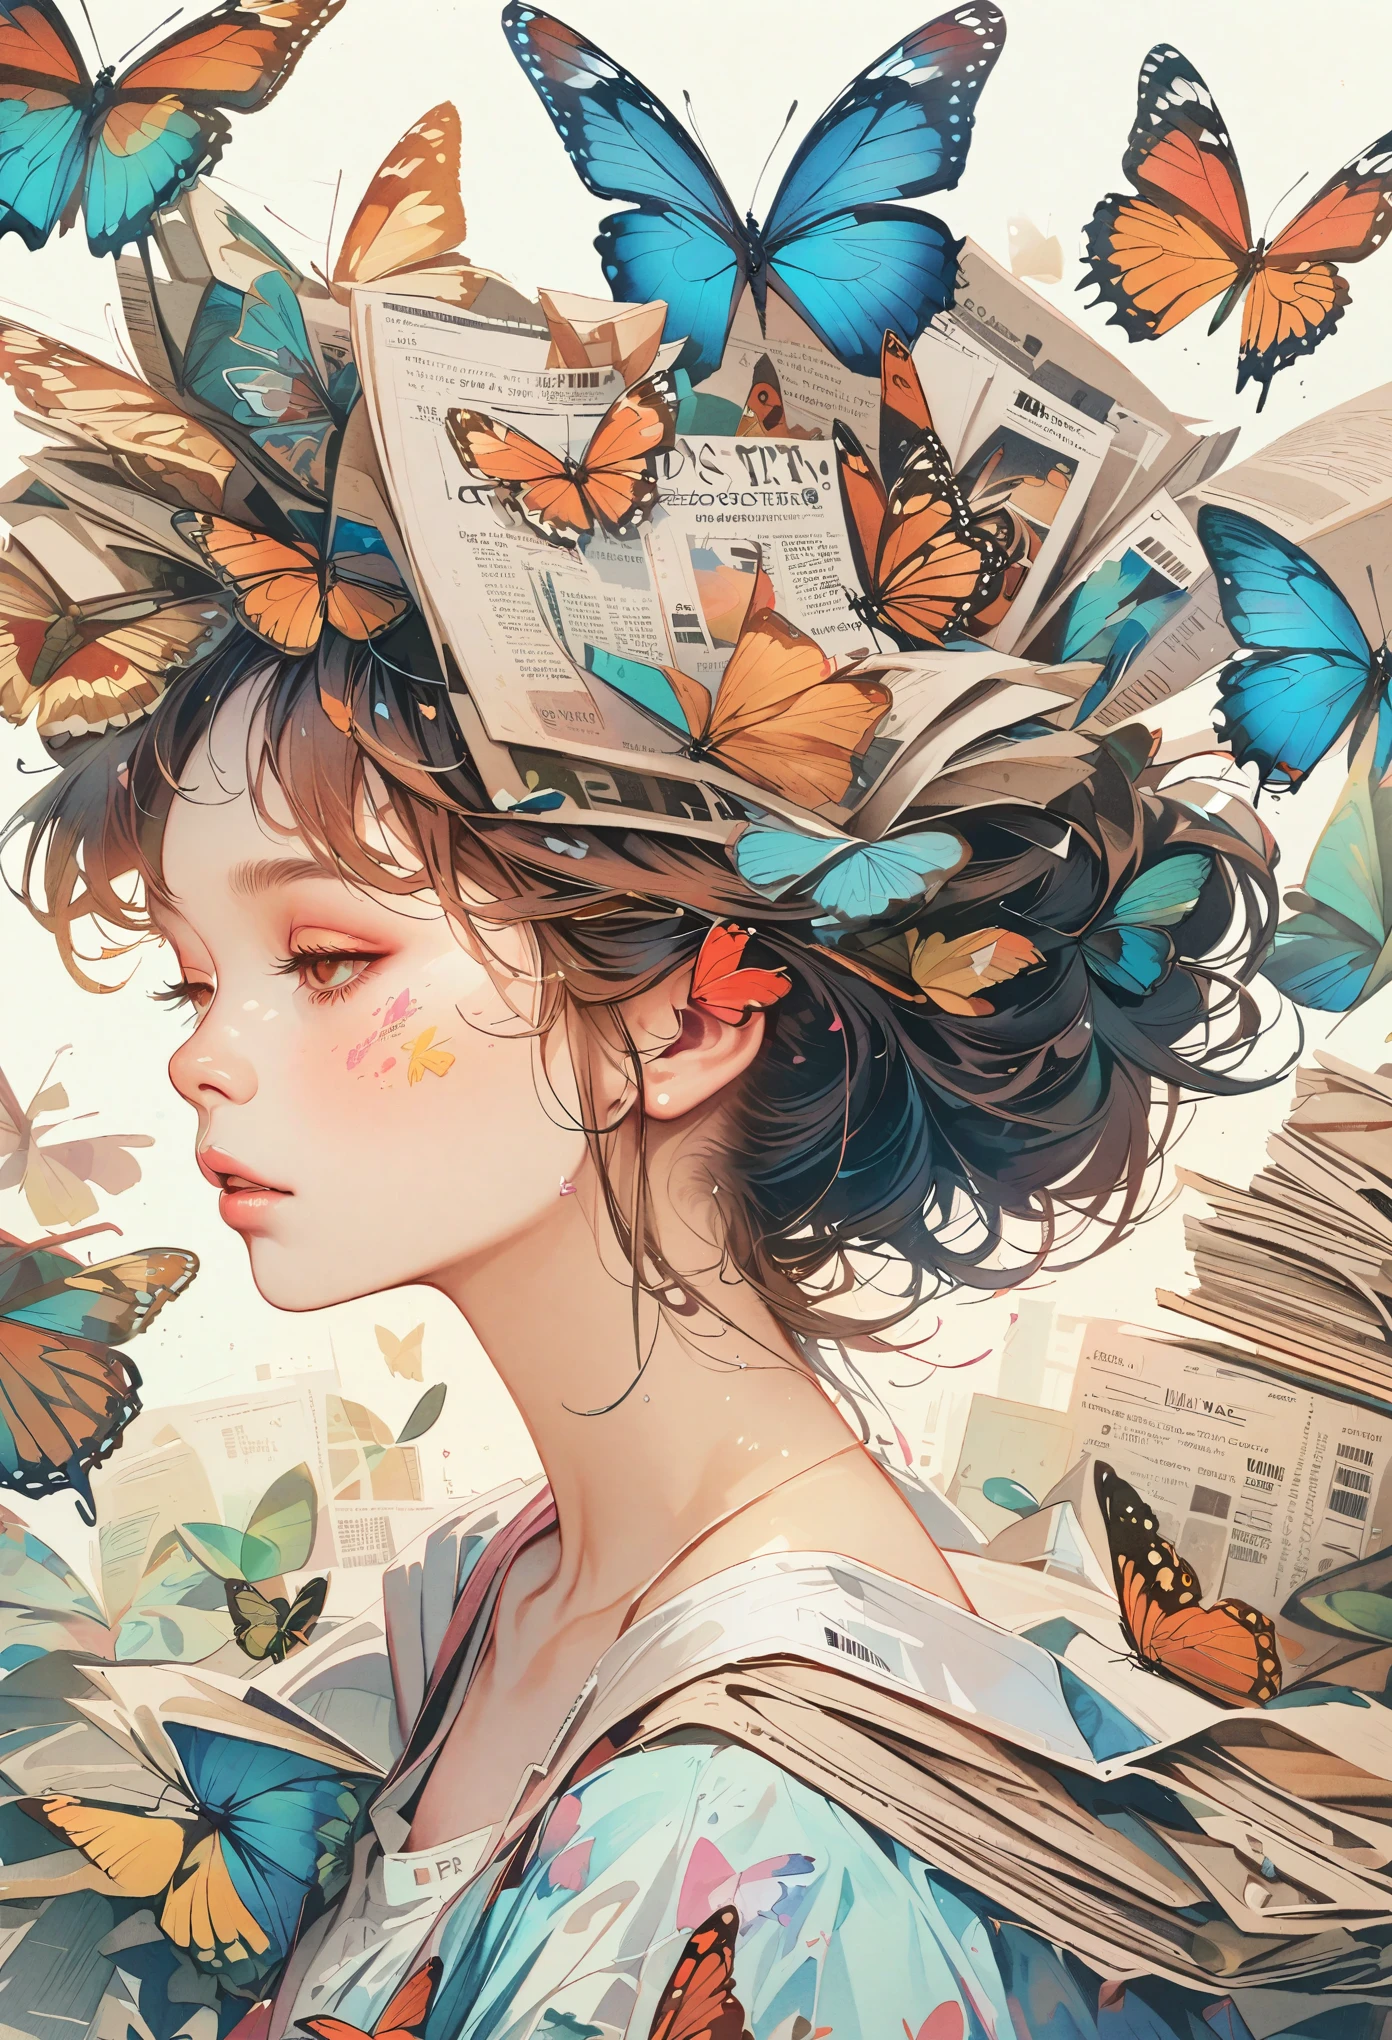 Girls side profile avatar, alone, Wearing a magazine cover dress, Detailed facial features and long eyelashes, A butterfly perches on her head, Surrounded by a row of newspaper clippings. The girl&#39;s face is very realistic and detailed, Bright colors、clear focus. The overall image is a high-resolution masterpiece, Perfect for magazine covers. The art style is a mix of photography and conceptual art. The shades are vibrant、striking. The lighting is studio style, Features soft and soft lighting. This tip also includes text and barcodes commonly found on magazine covers.